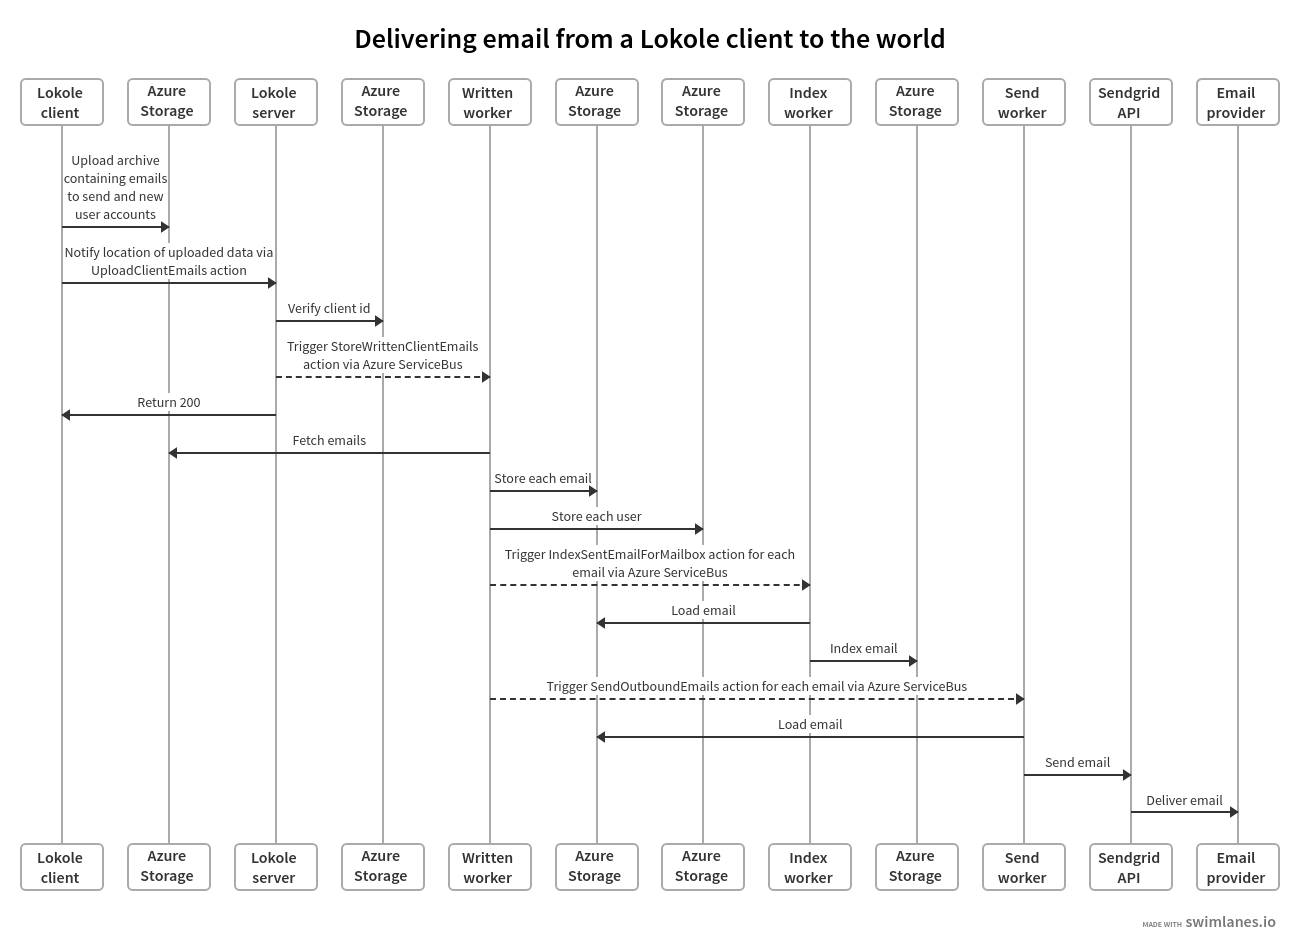 Overview of the Lokole client email upload flow